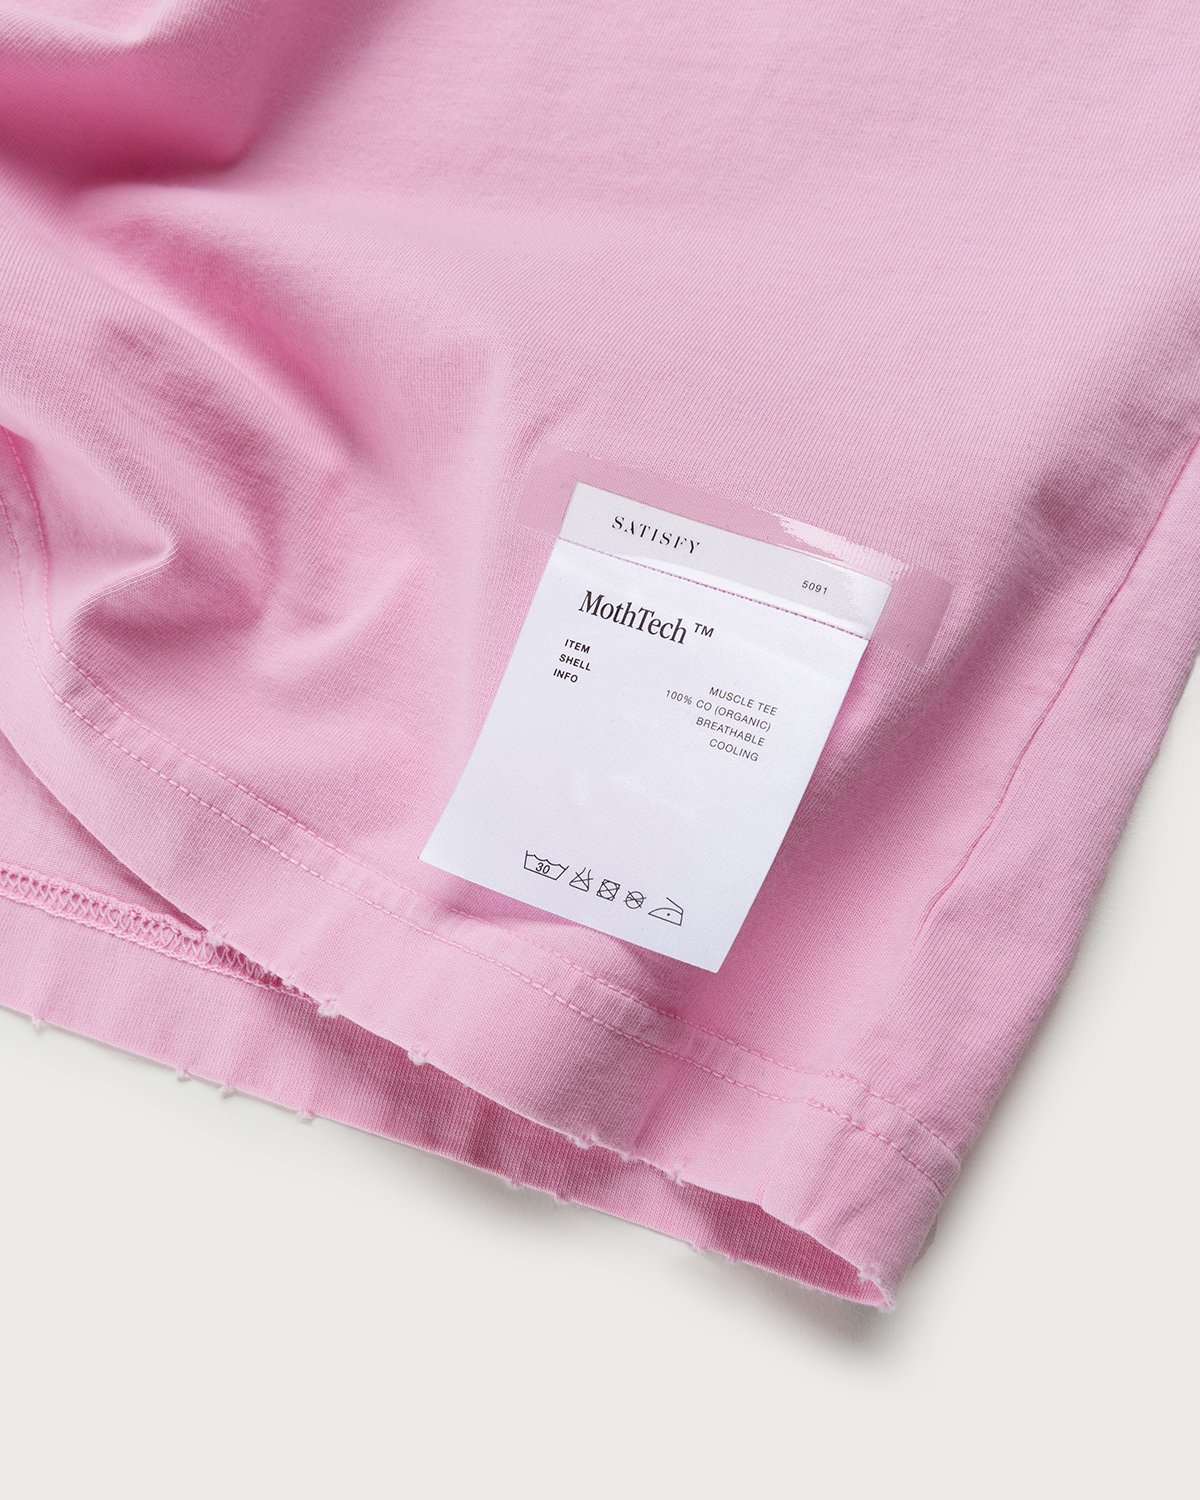 Satisfy x Highsnobiety - HS Sports Balance Muscle Tee Pink - Clothing - Pink - Image 5